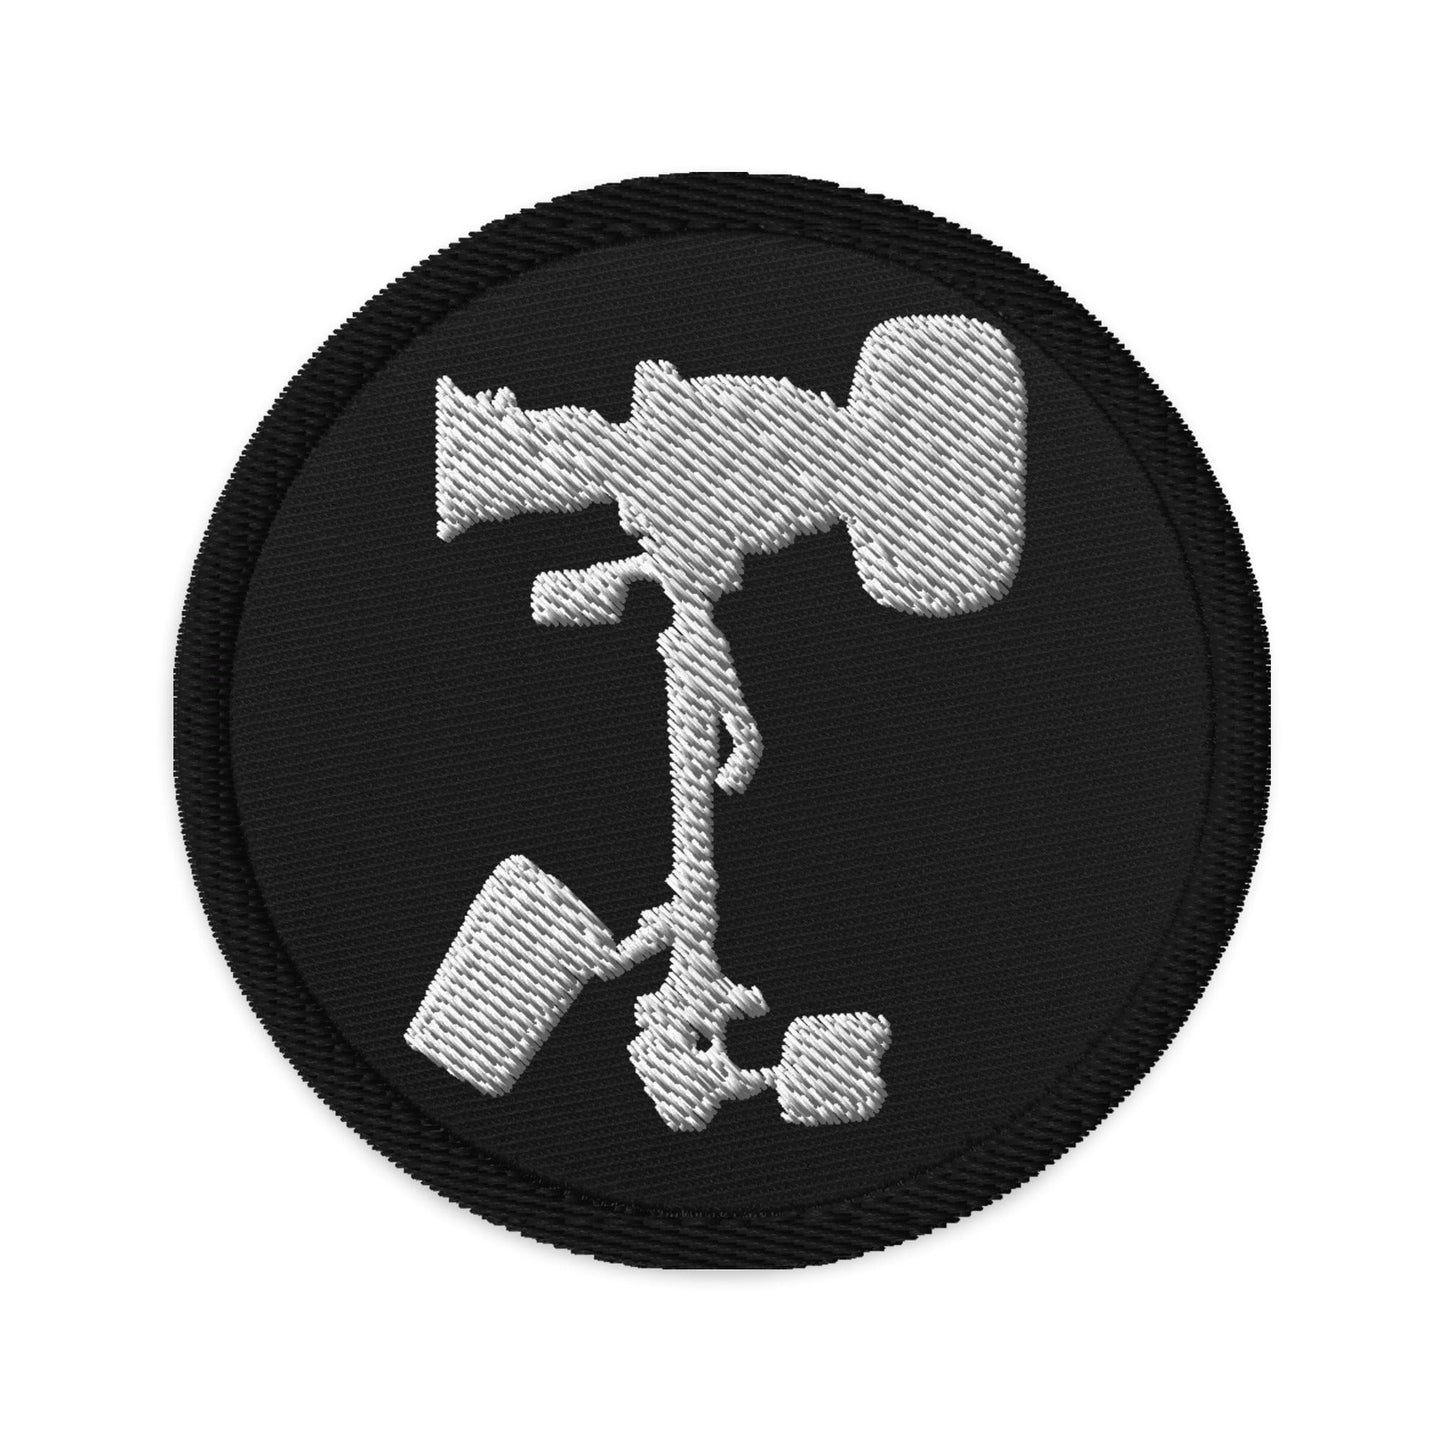 Production Apparel Steadicam Silhouette patches